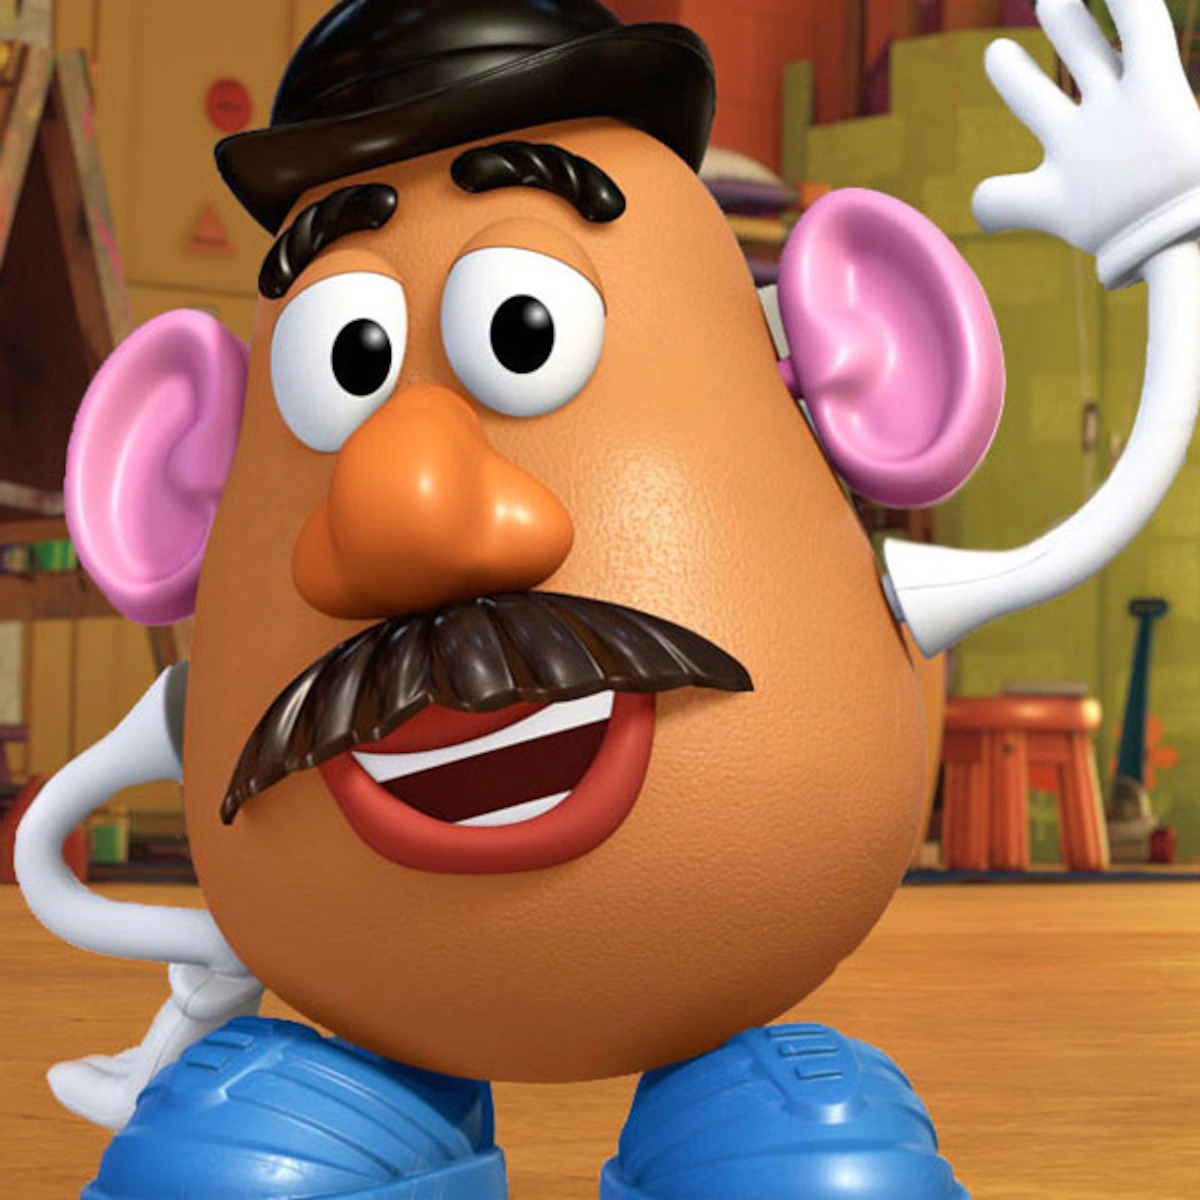 https://facts.net/wp-content/uploads/2023/09/25-facts-about-mr-potato-head-toy-story-1694064110.jpg